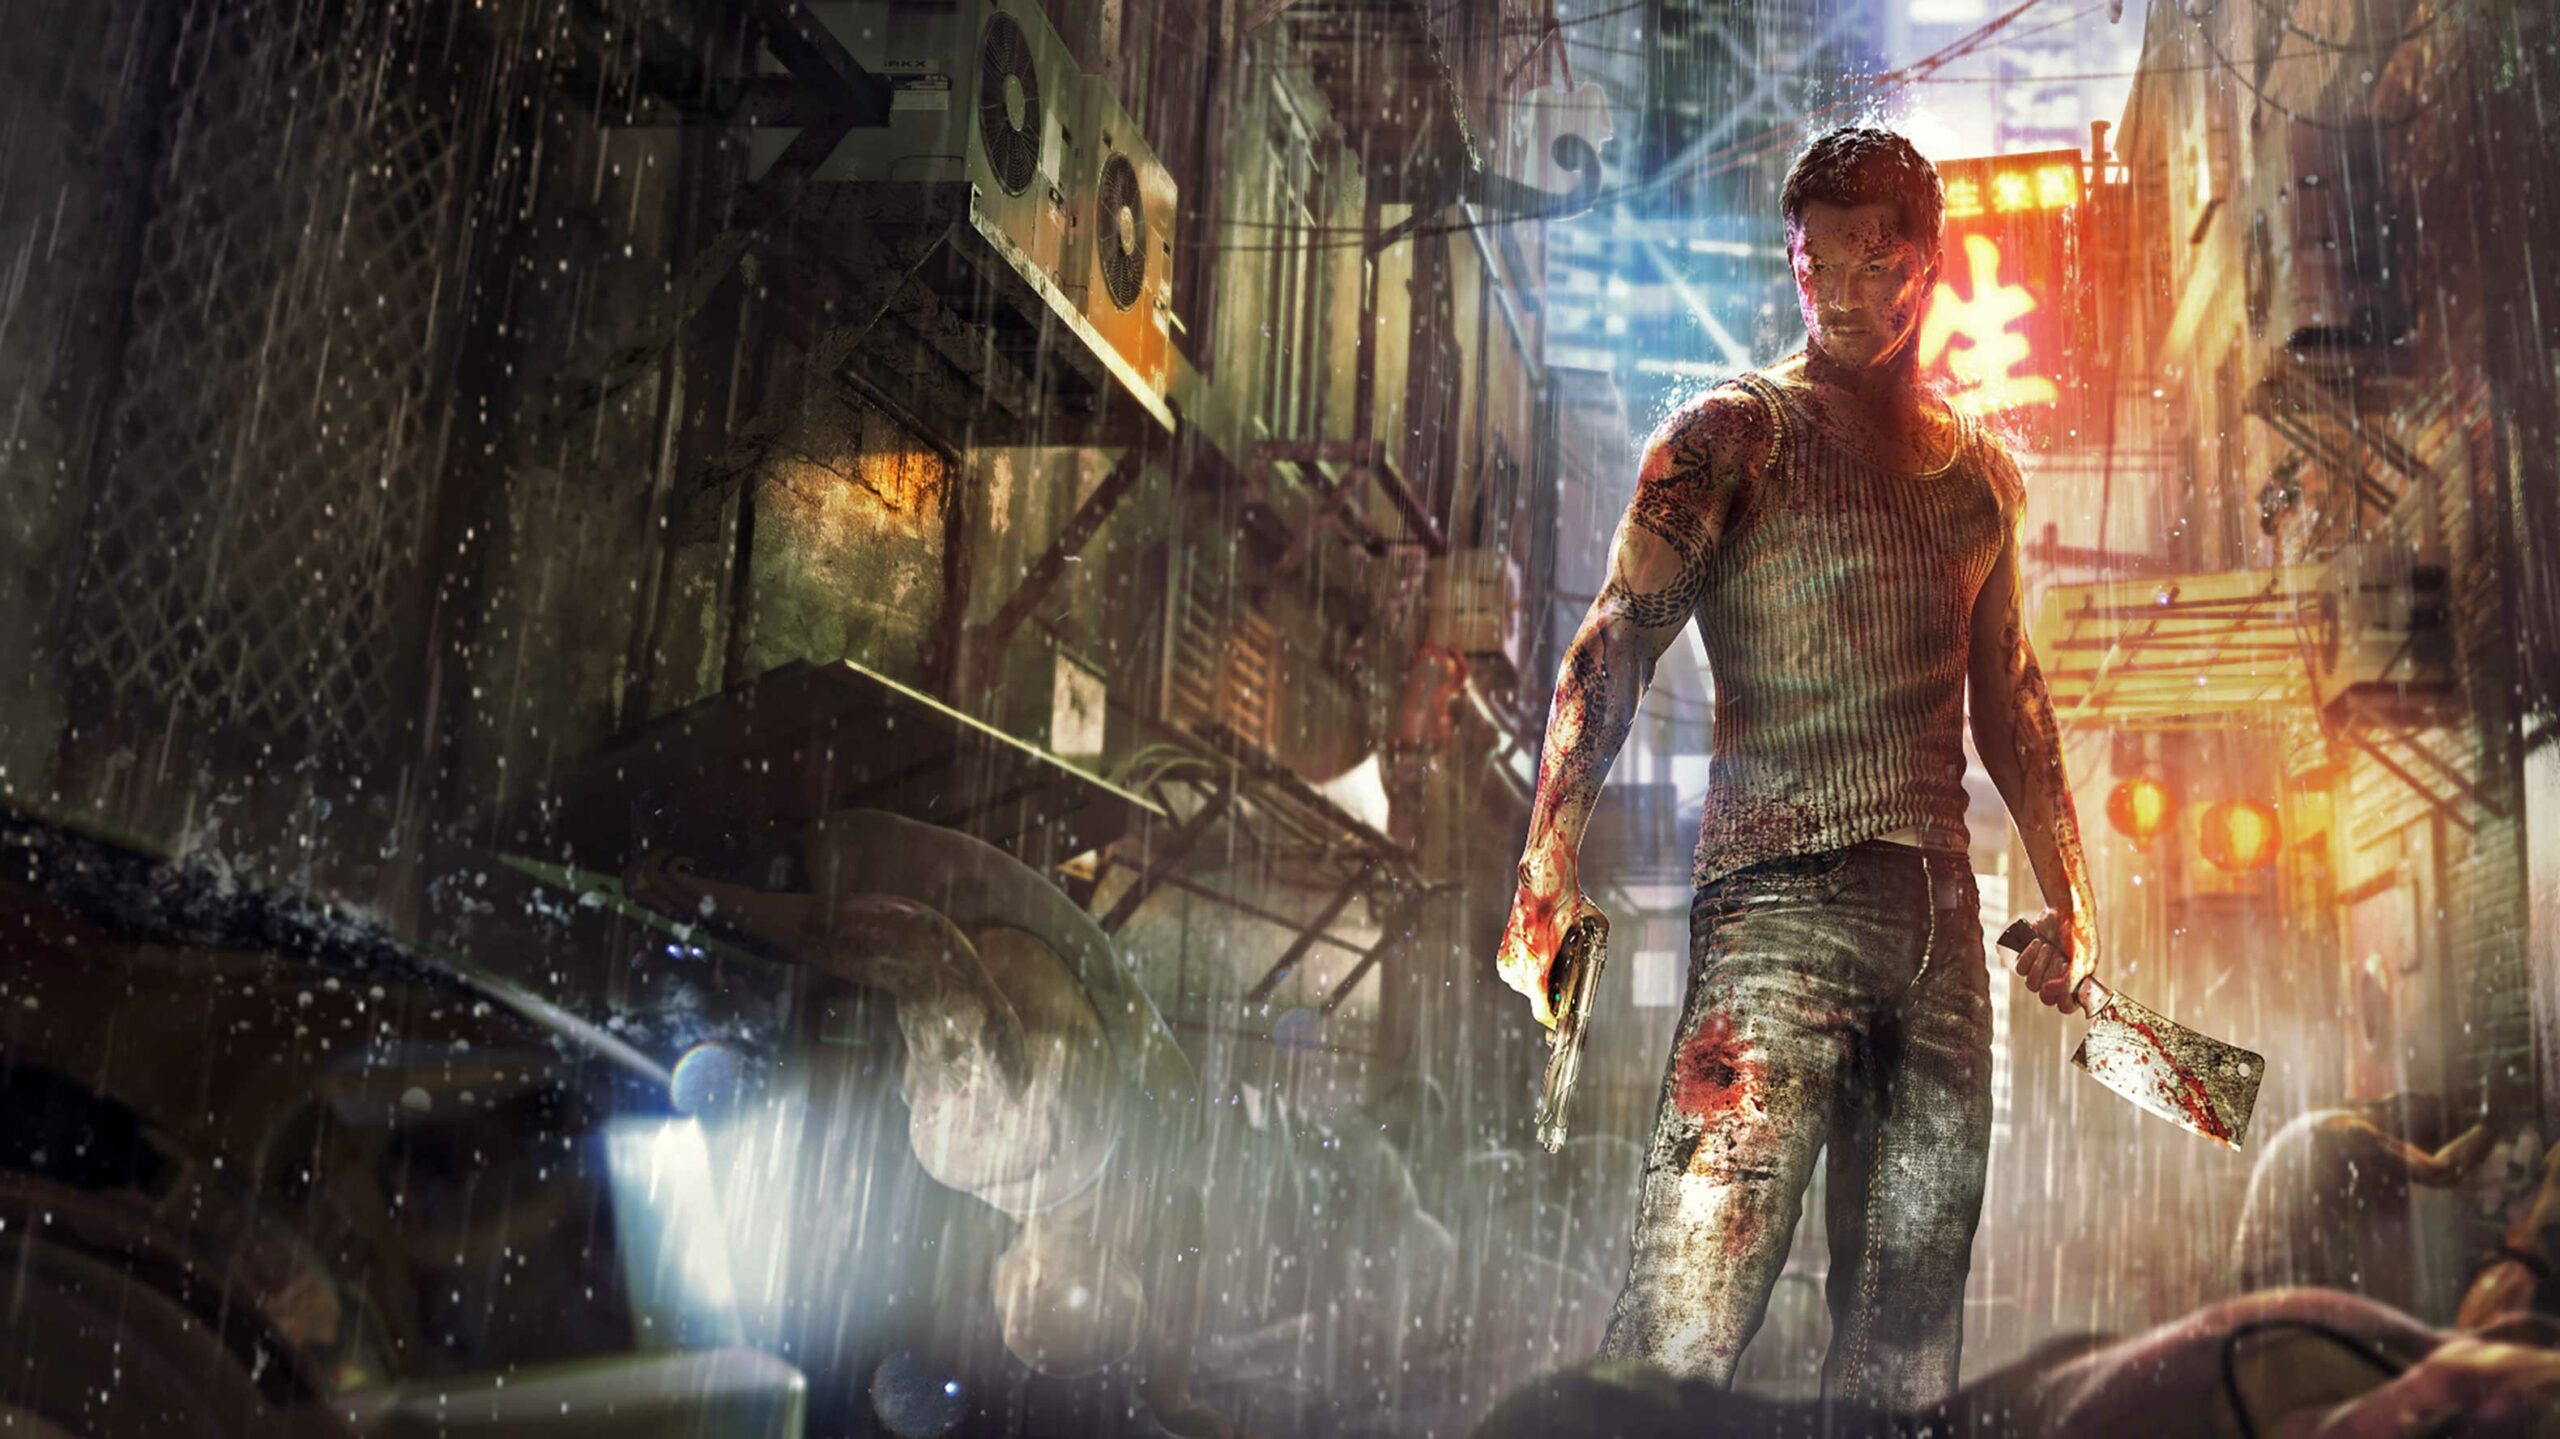 Sleeping Dogs key art Wei with gun and knife